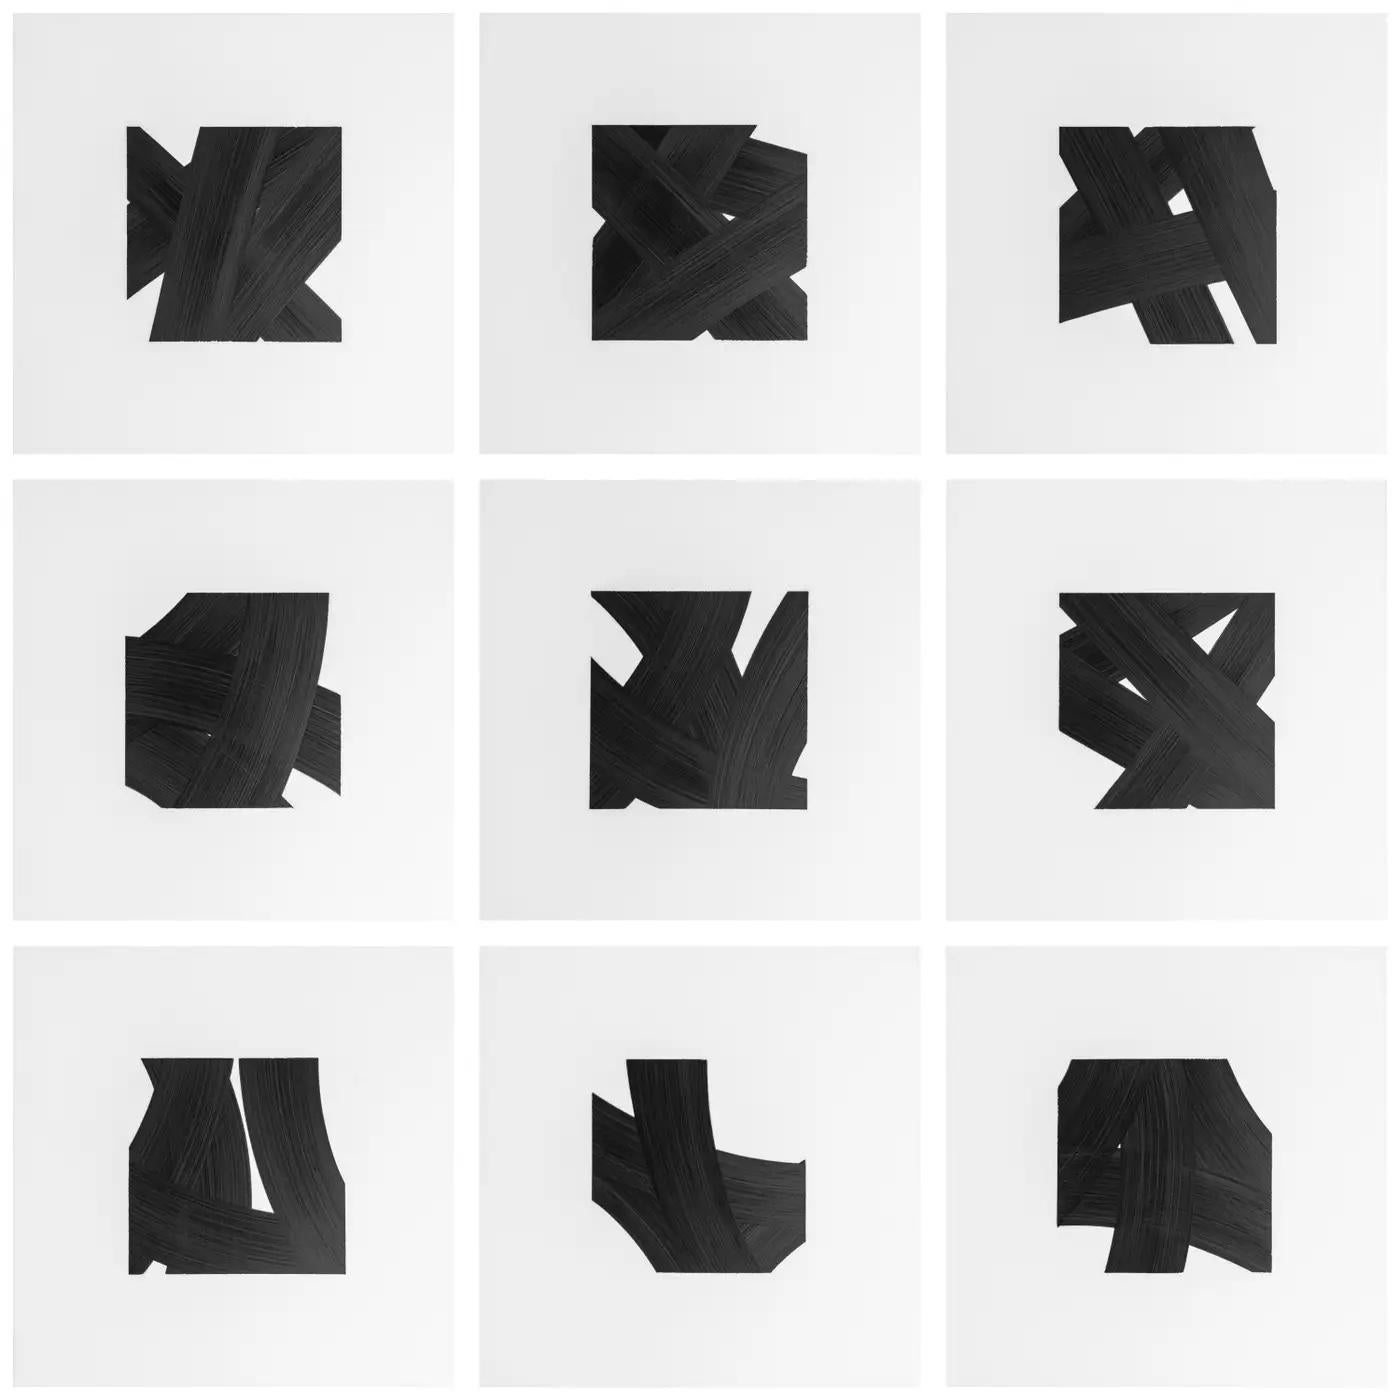 Contemporary New York artist Patrick Carrara's black ink on mylar drawings were created in 2016 - 2017. This is his latest series Appearance, which he started ten years ago and also progresses by number. He uses black ink on Mylar, layering over and